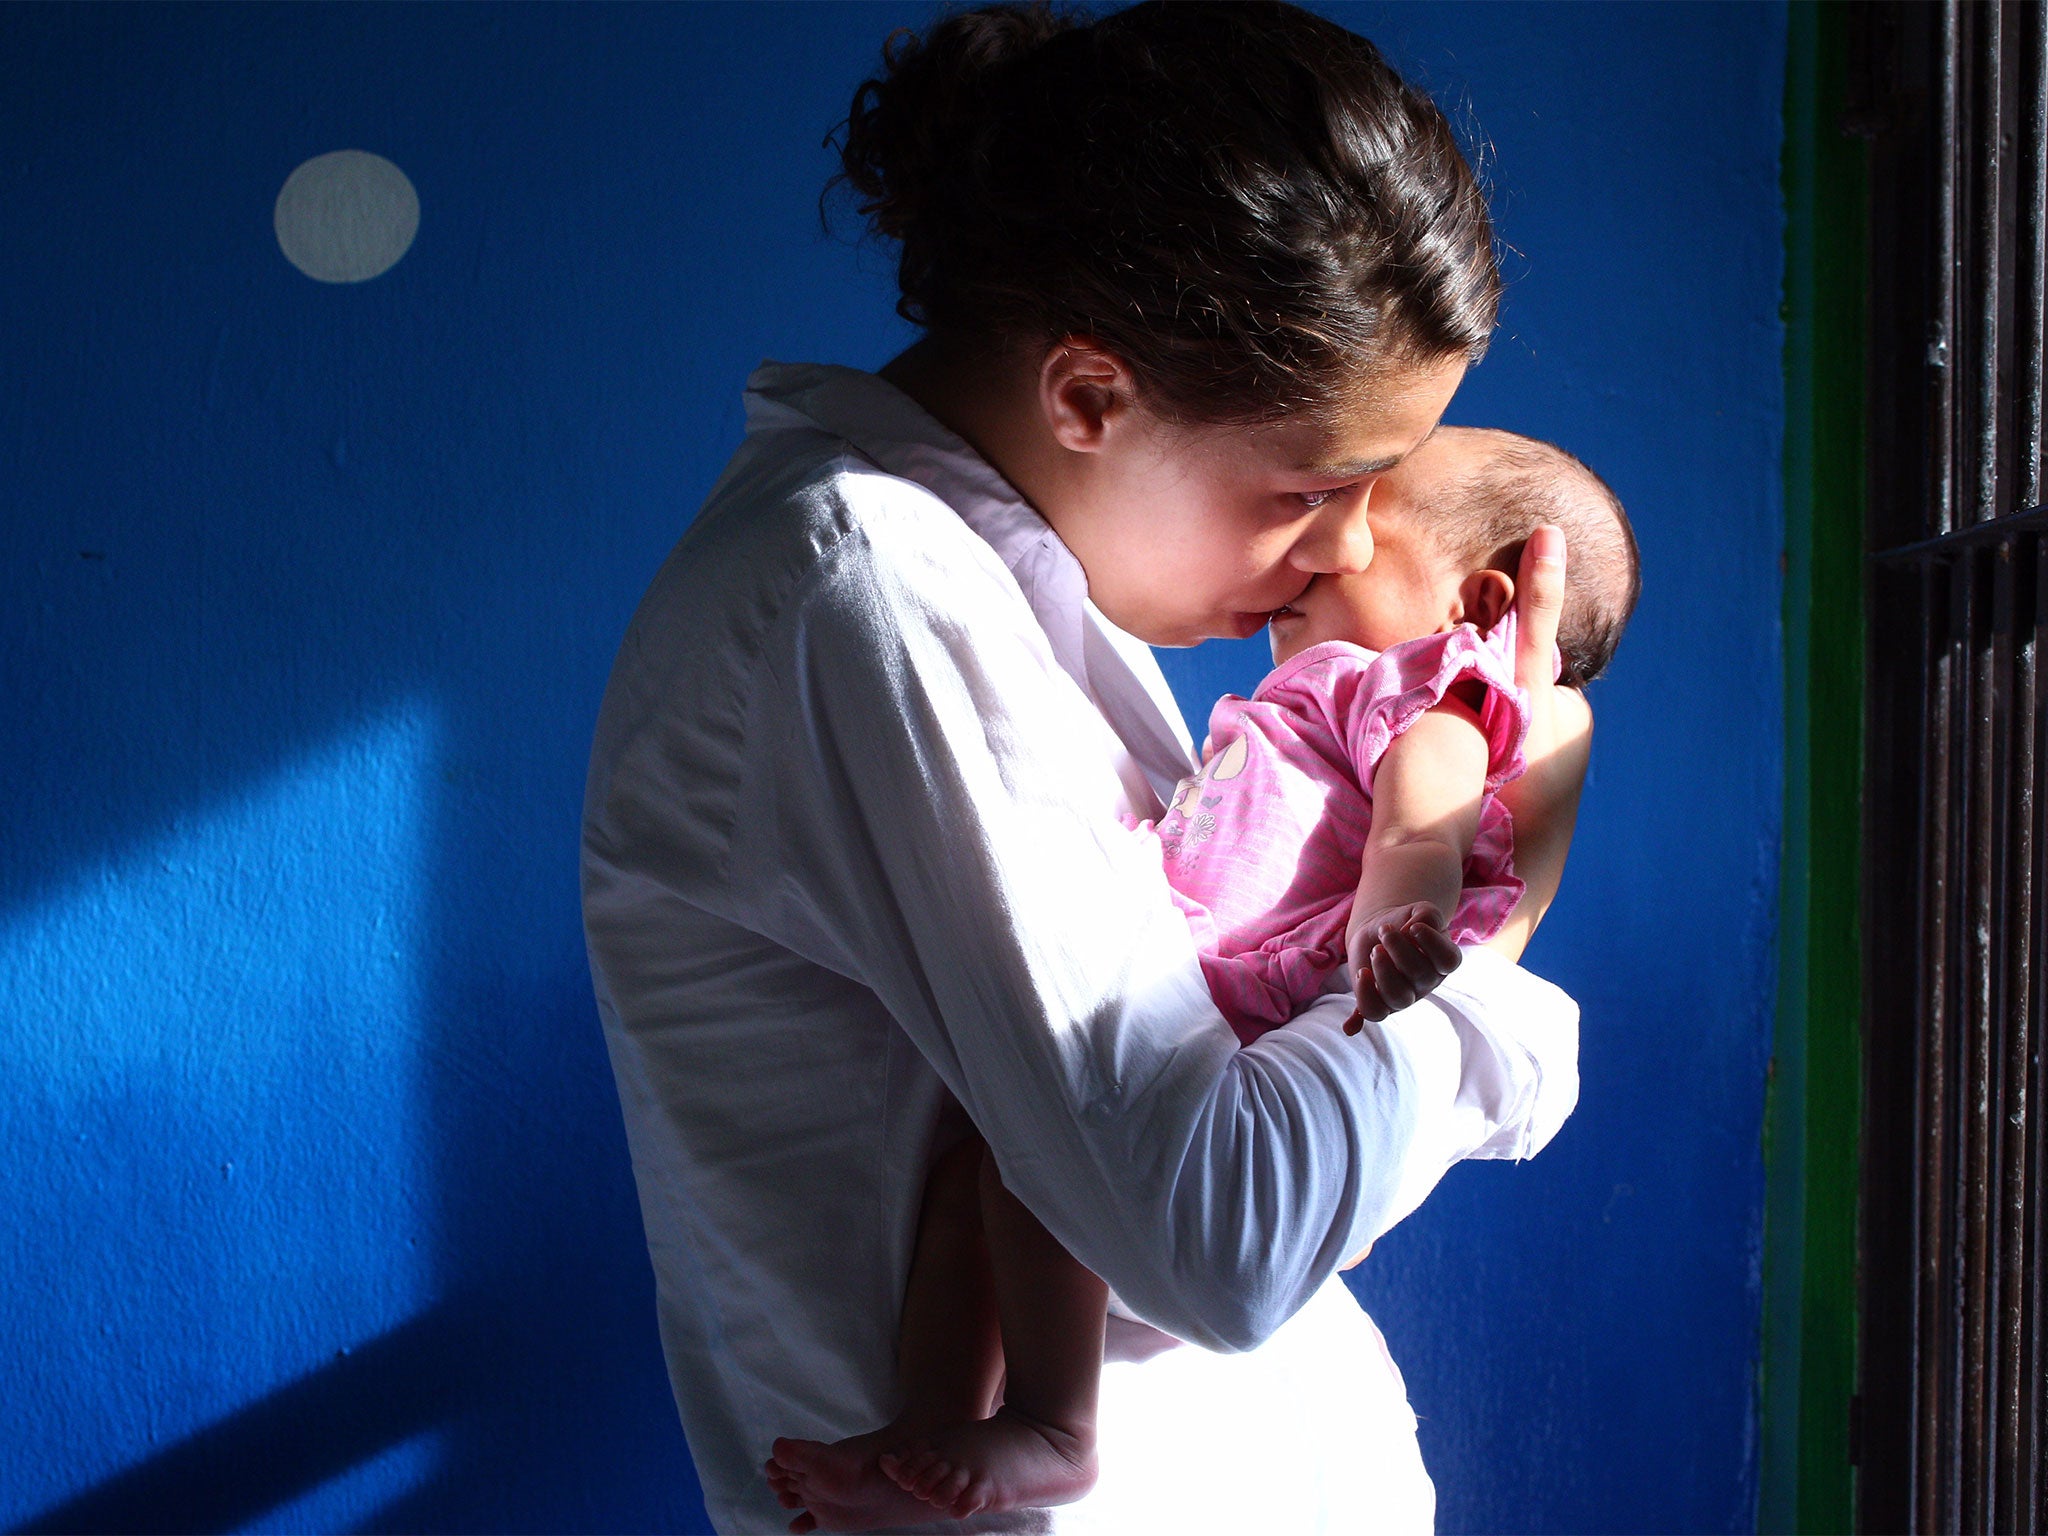 Heather Mack with her baby daughter inside a prison cell in Indonesia